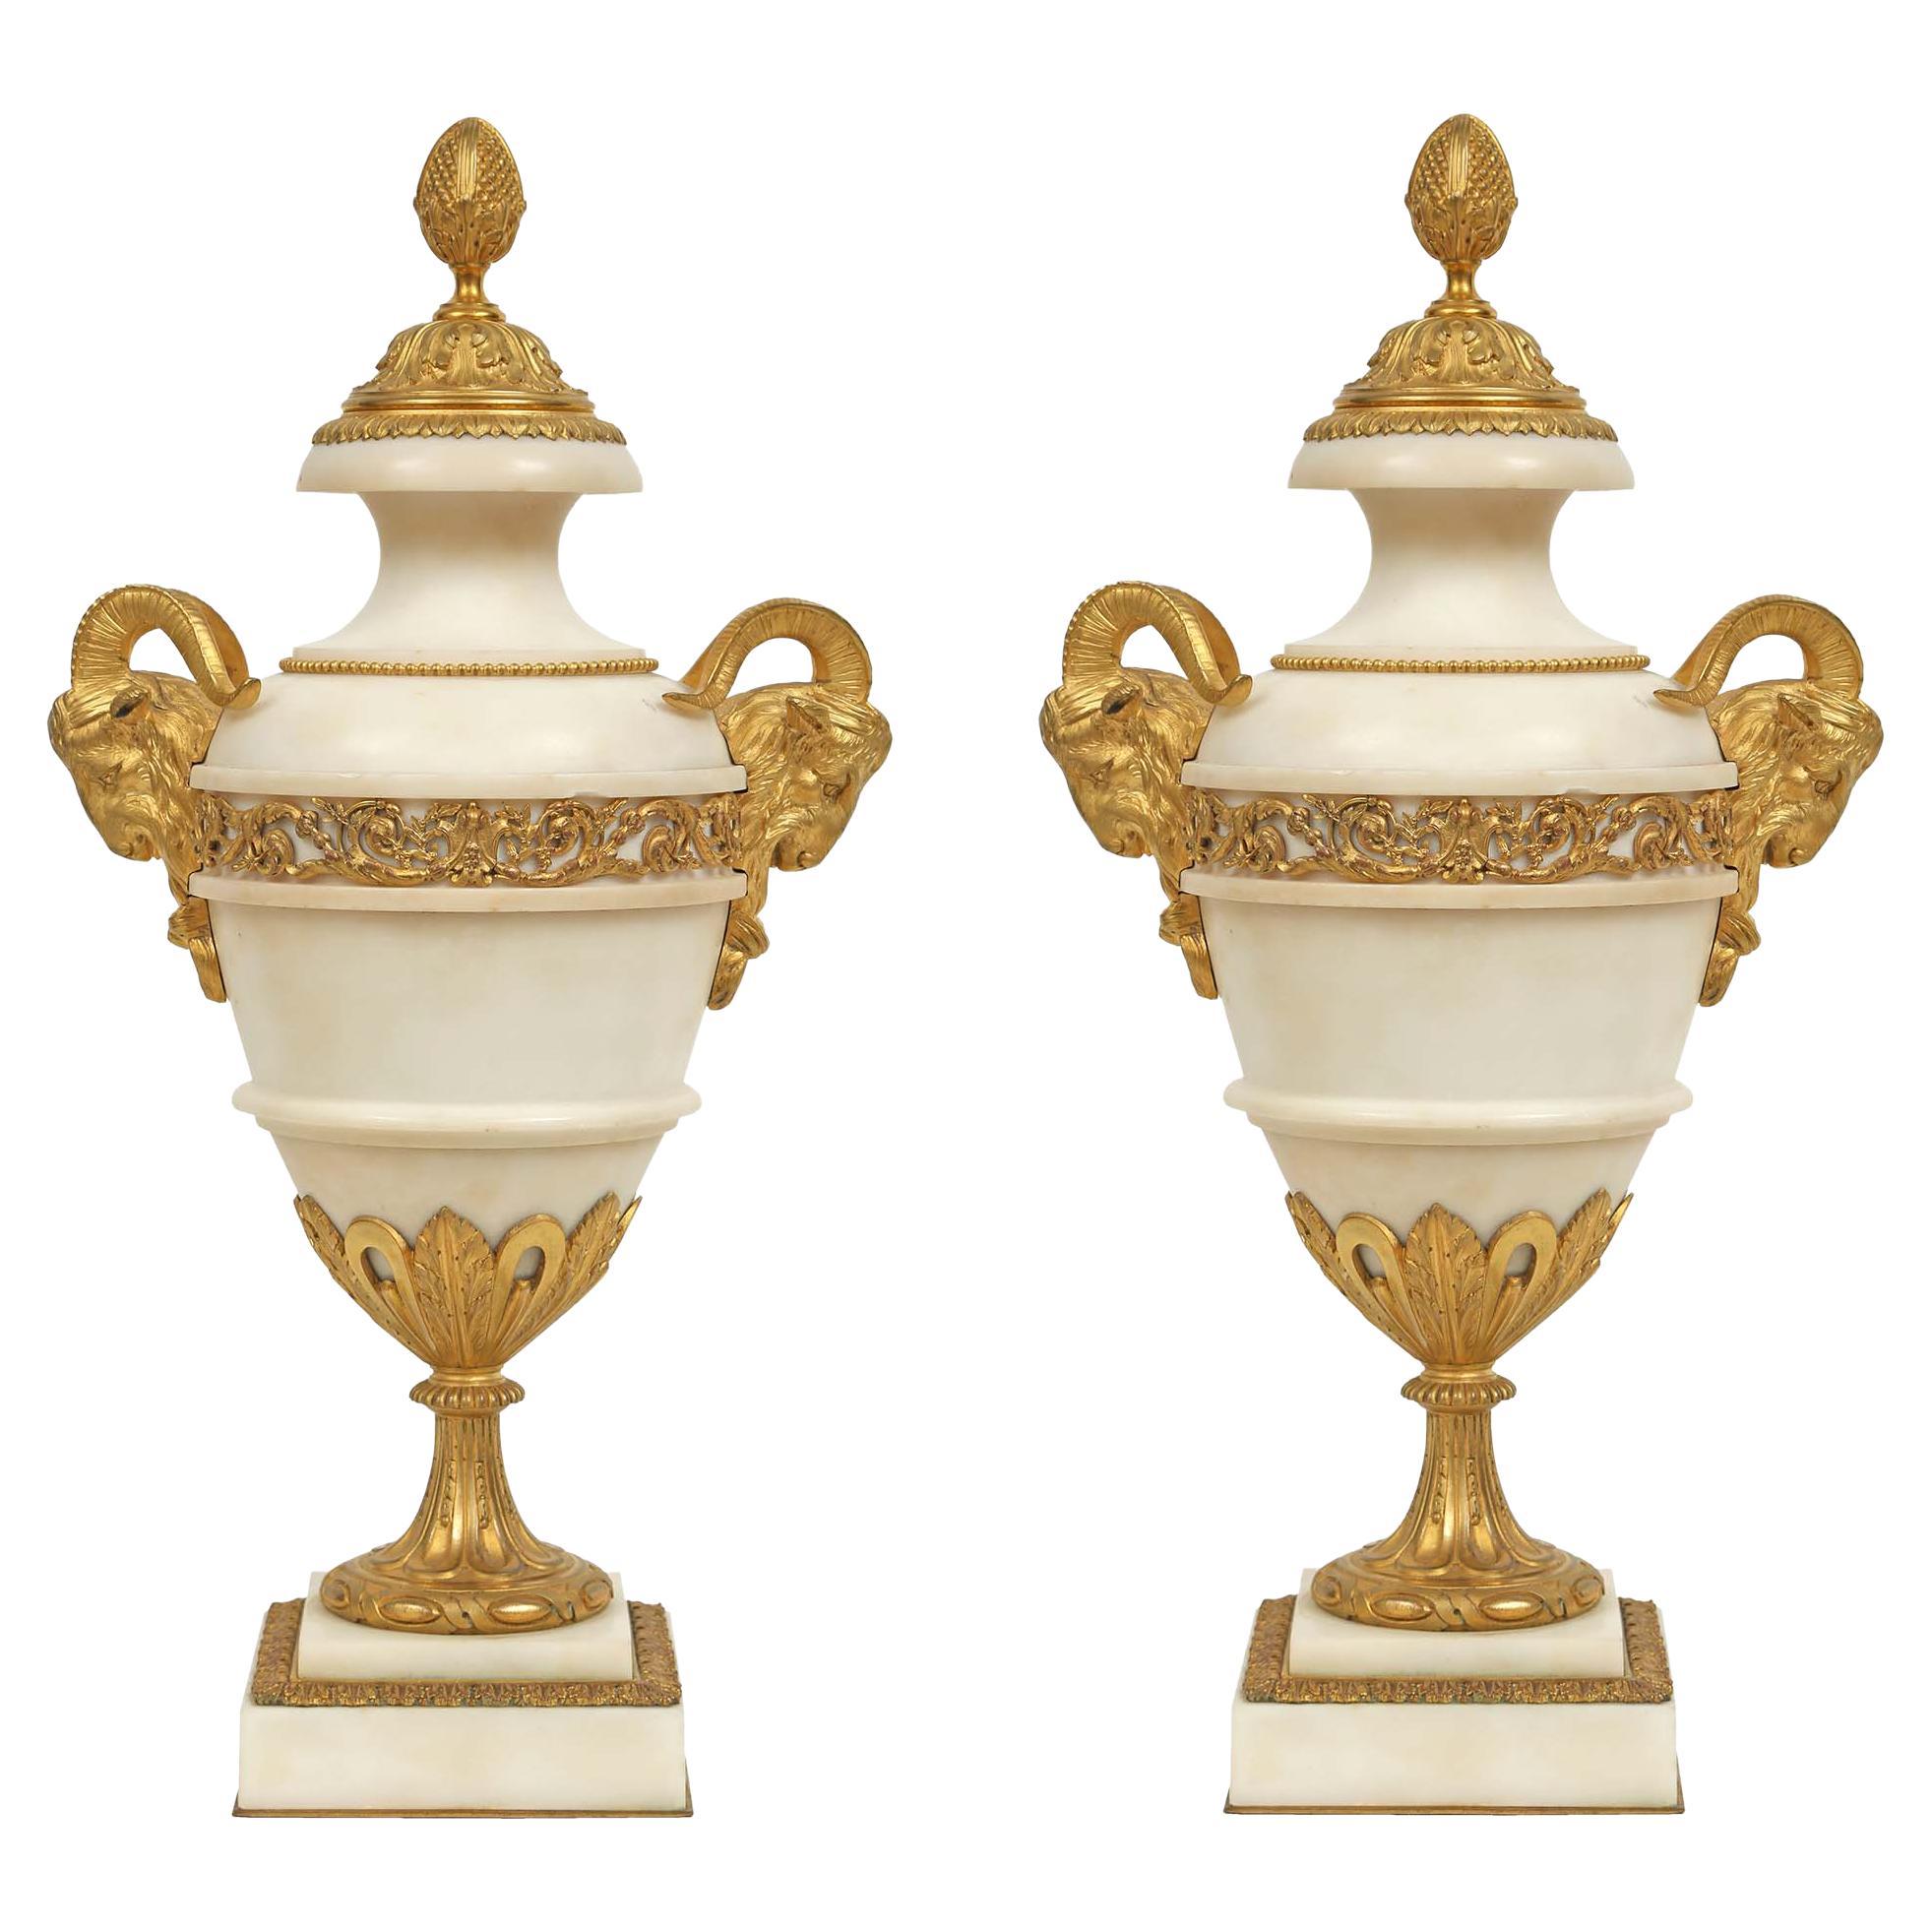 French 19th Century Louis XVI Style White Carrara Marble and Ormolu Urns For Sale